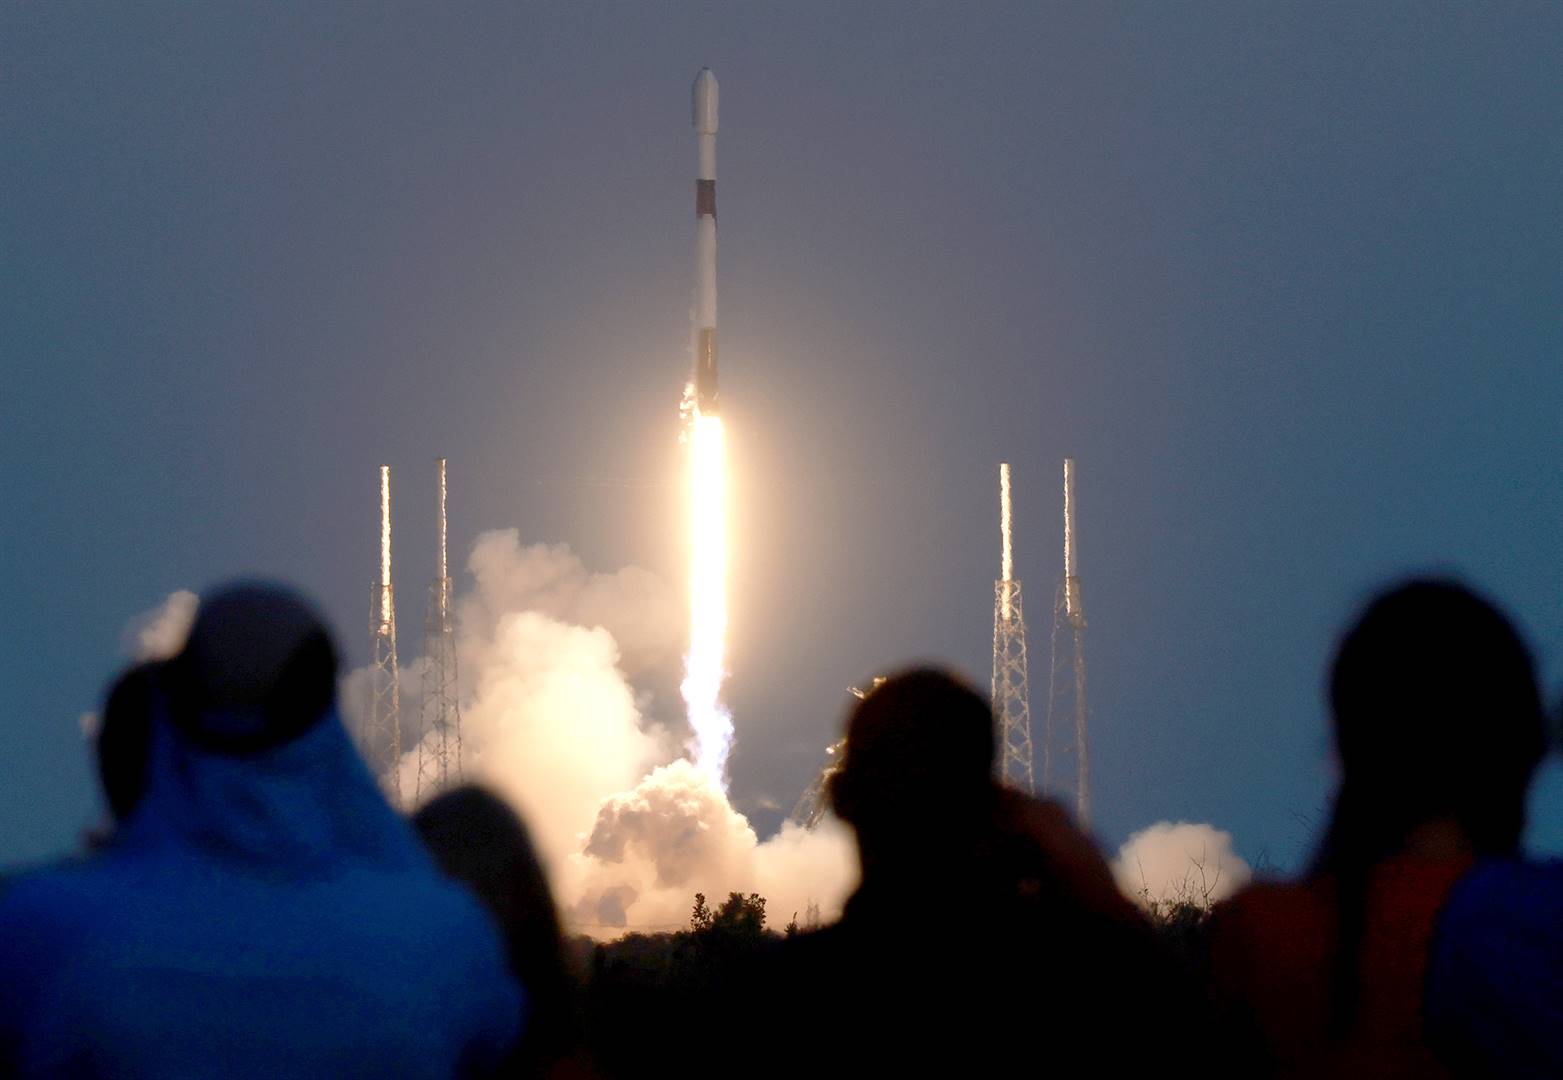 Specators watch SpaceX Falcon 9 rocket launch in Florida.  Photo: JOE RAEDLE/GETTY IMAGES